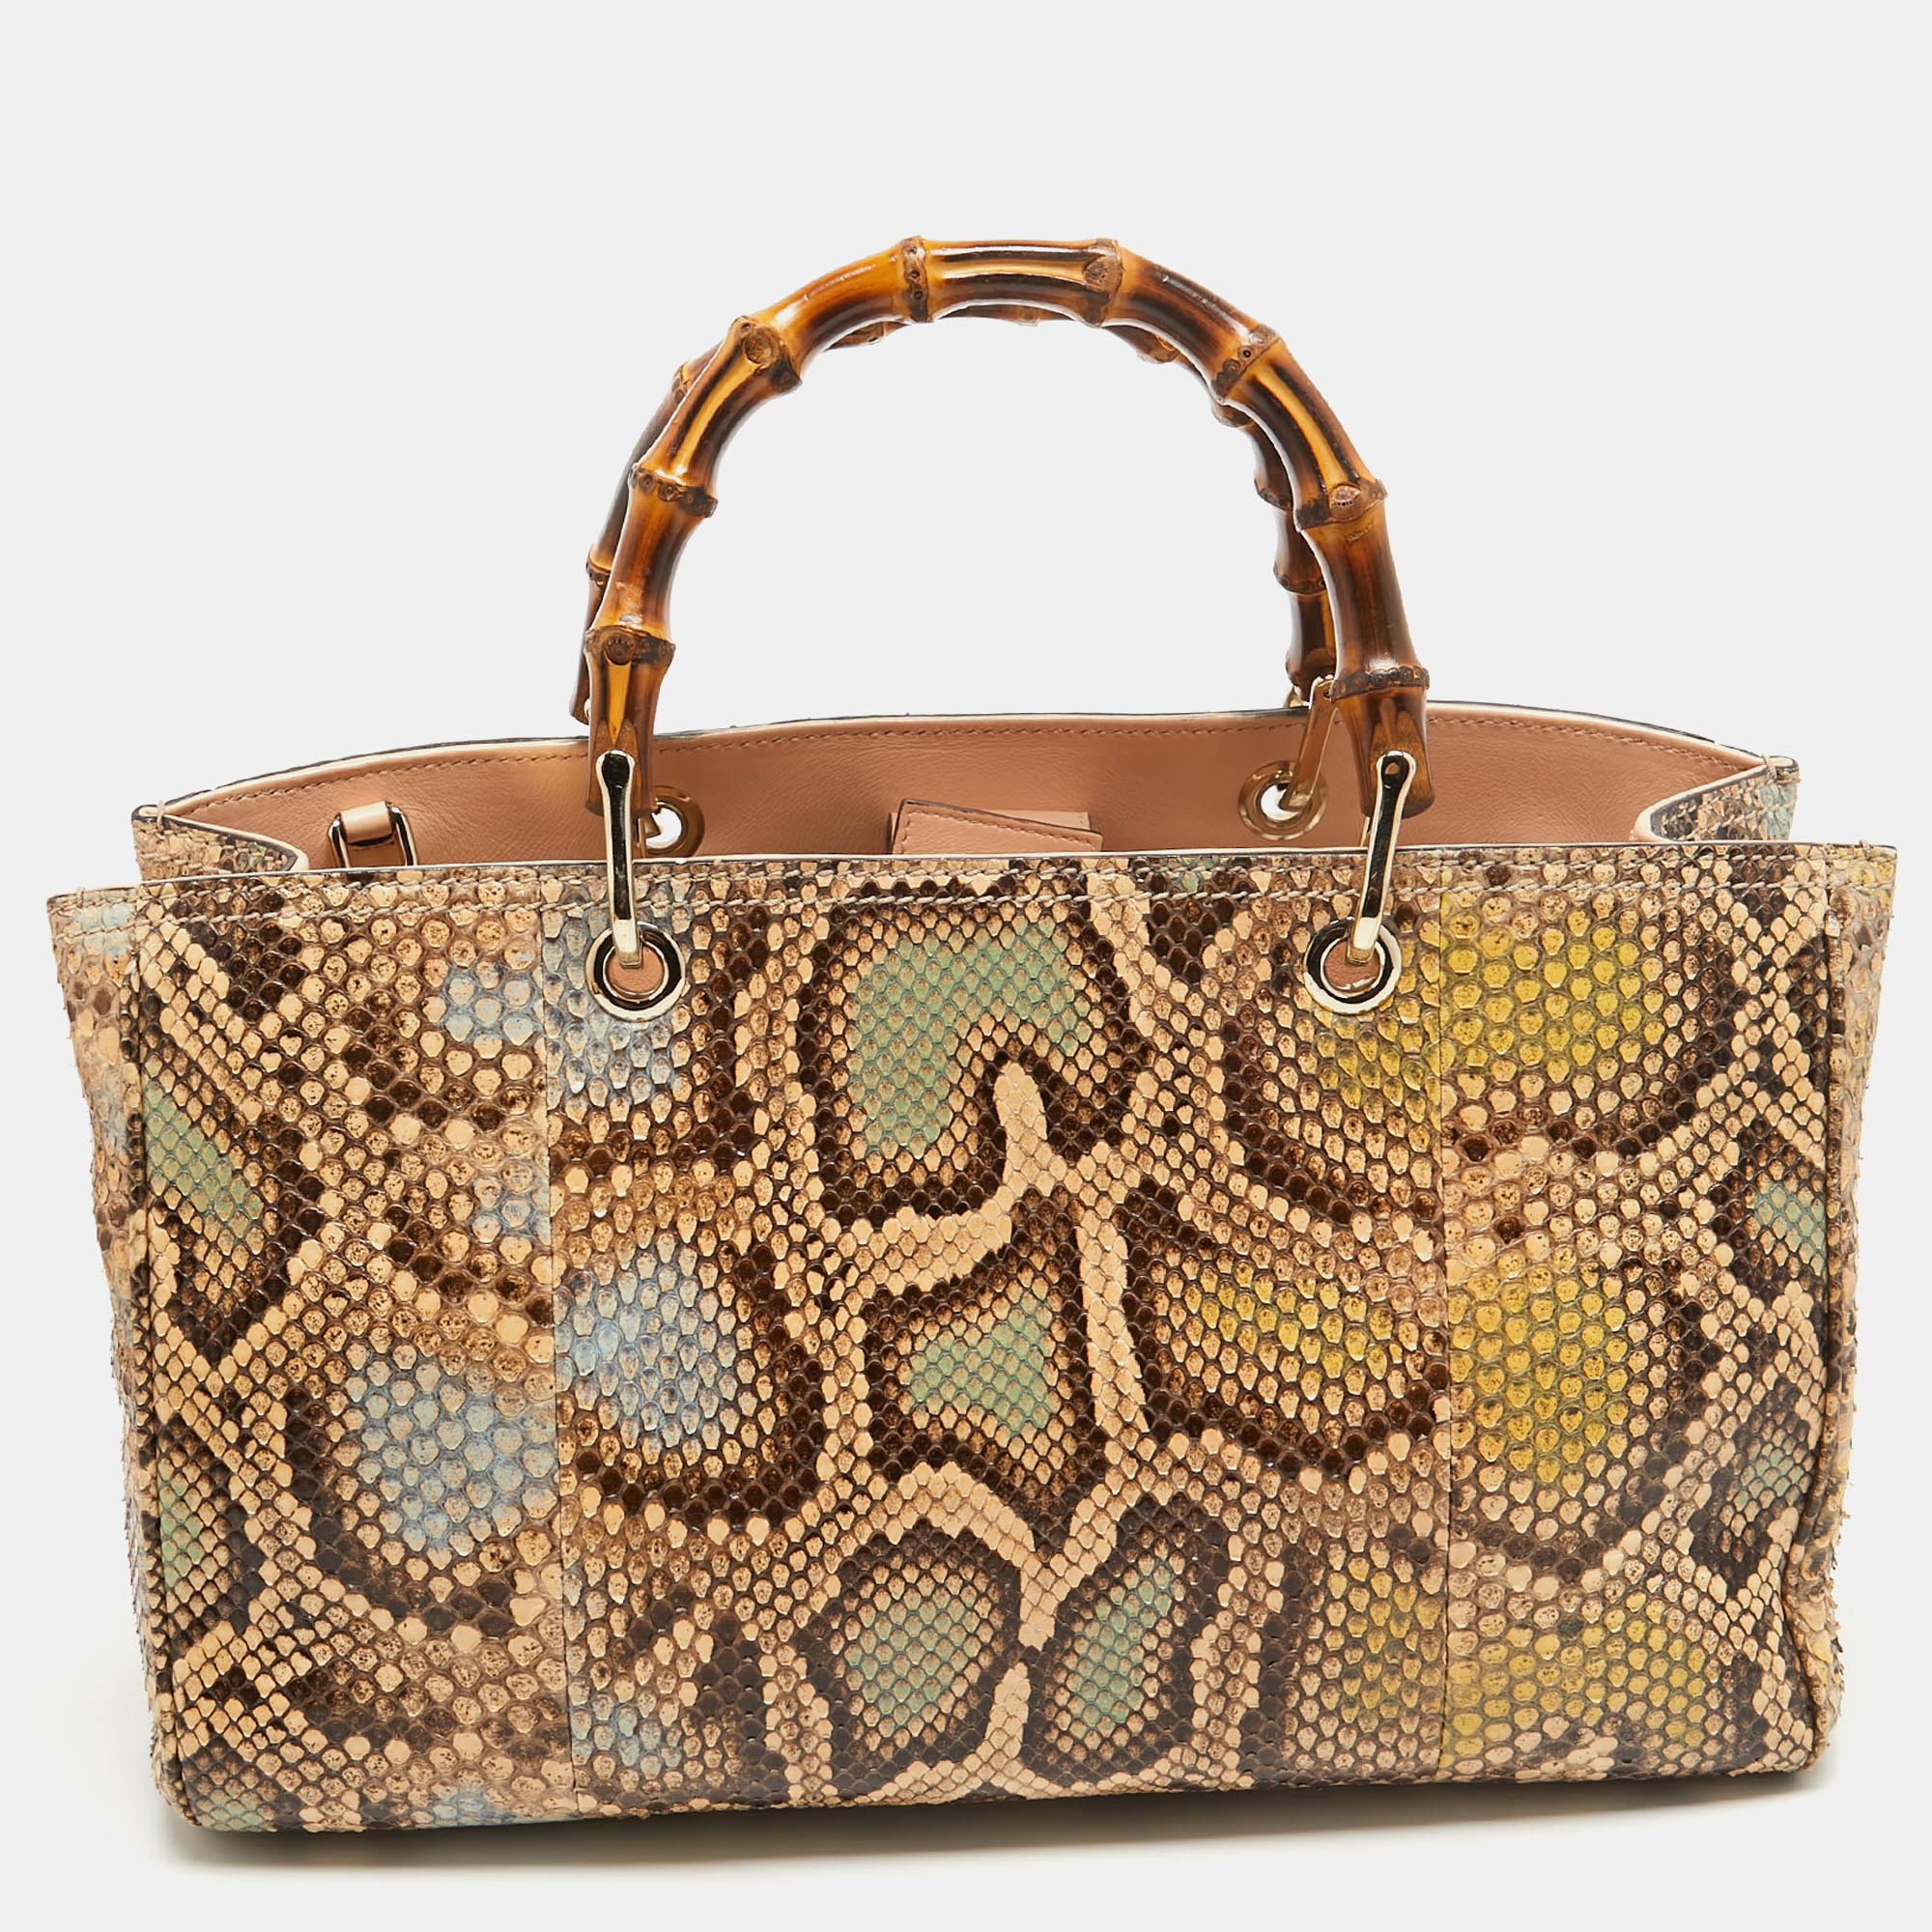 This Gucci Bamboo tote promises to take you through the day with ease whether youre at work or out and about in the city. From its design to its structure the python leather bag promises charm and durability. It has top bamboo handles and a spacious interior to hold all your essentials.